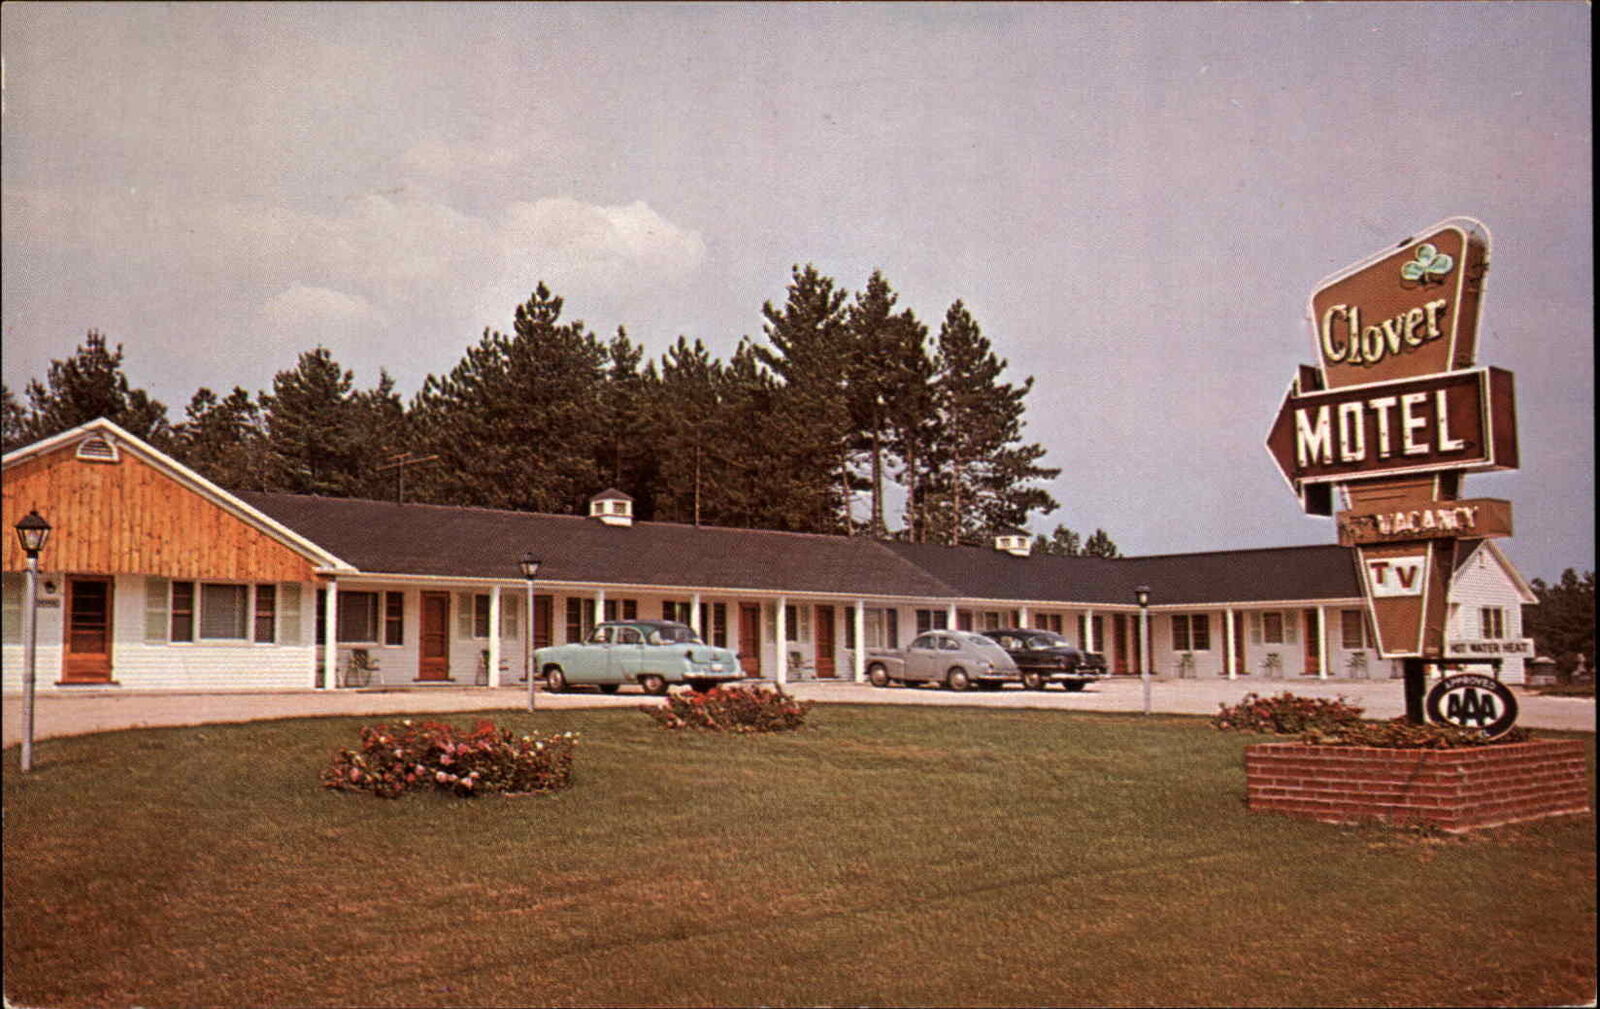 North Conway New Hampshire NH Clover Motel Cars VW Bug c1950s-60s Postcard